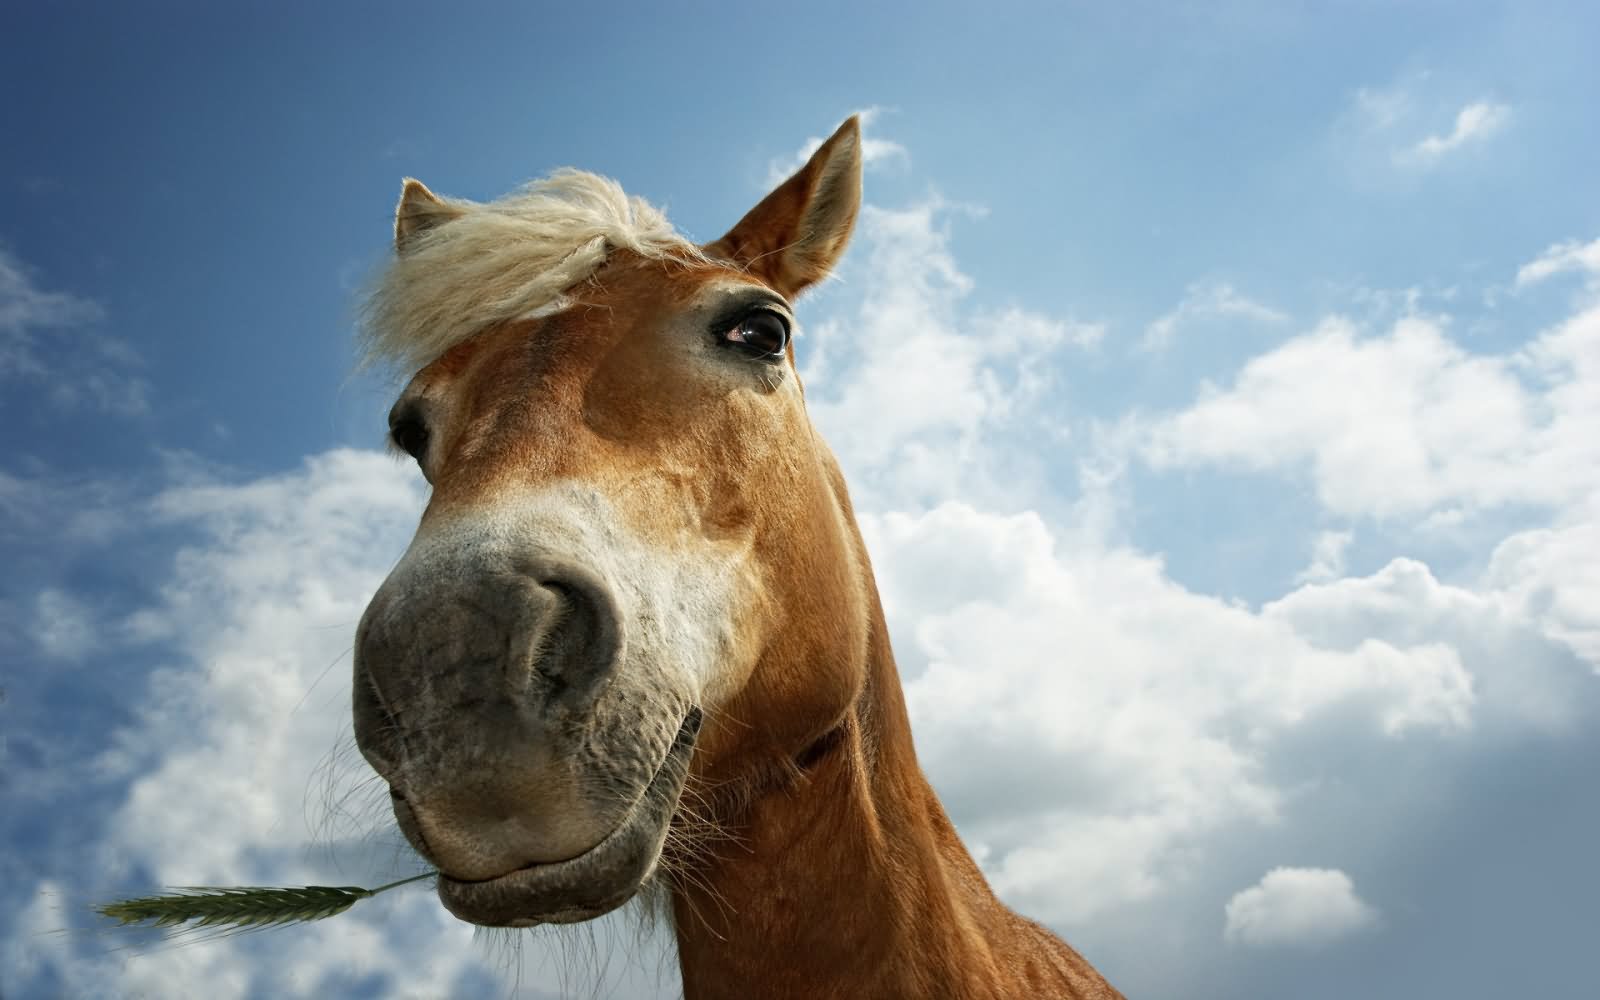 Horse Funny Face Nice Pose Image